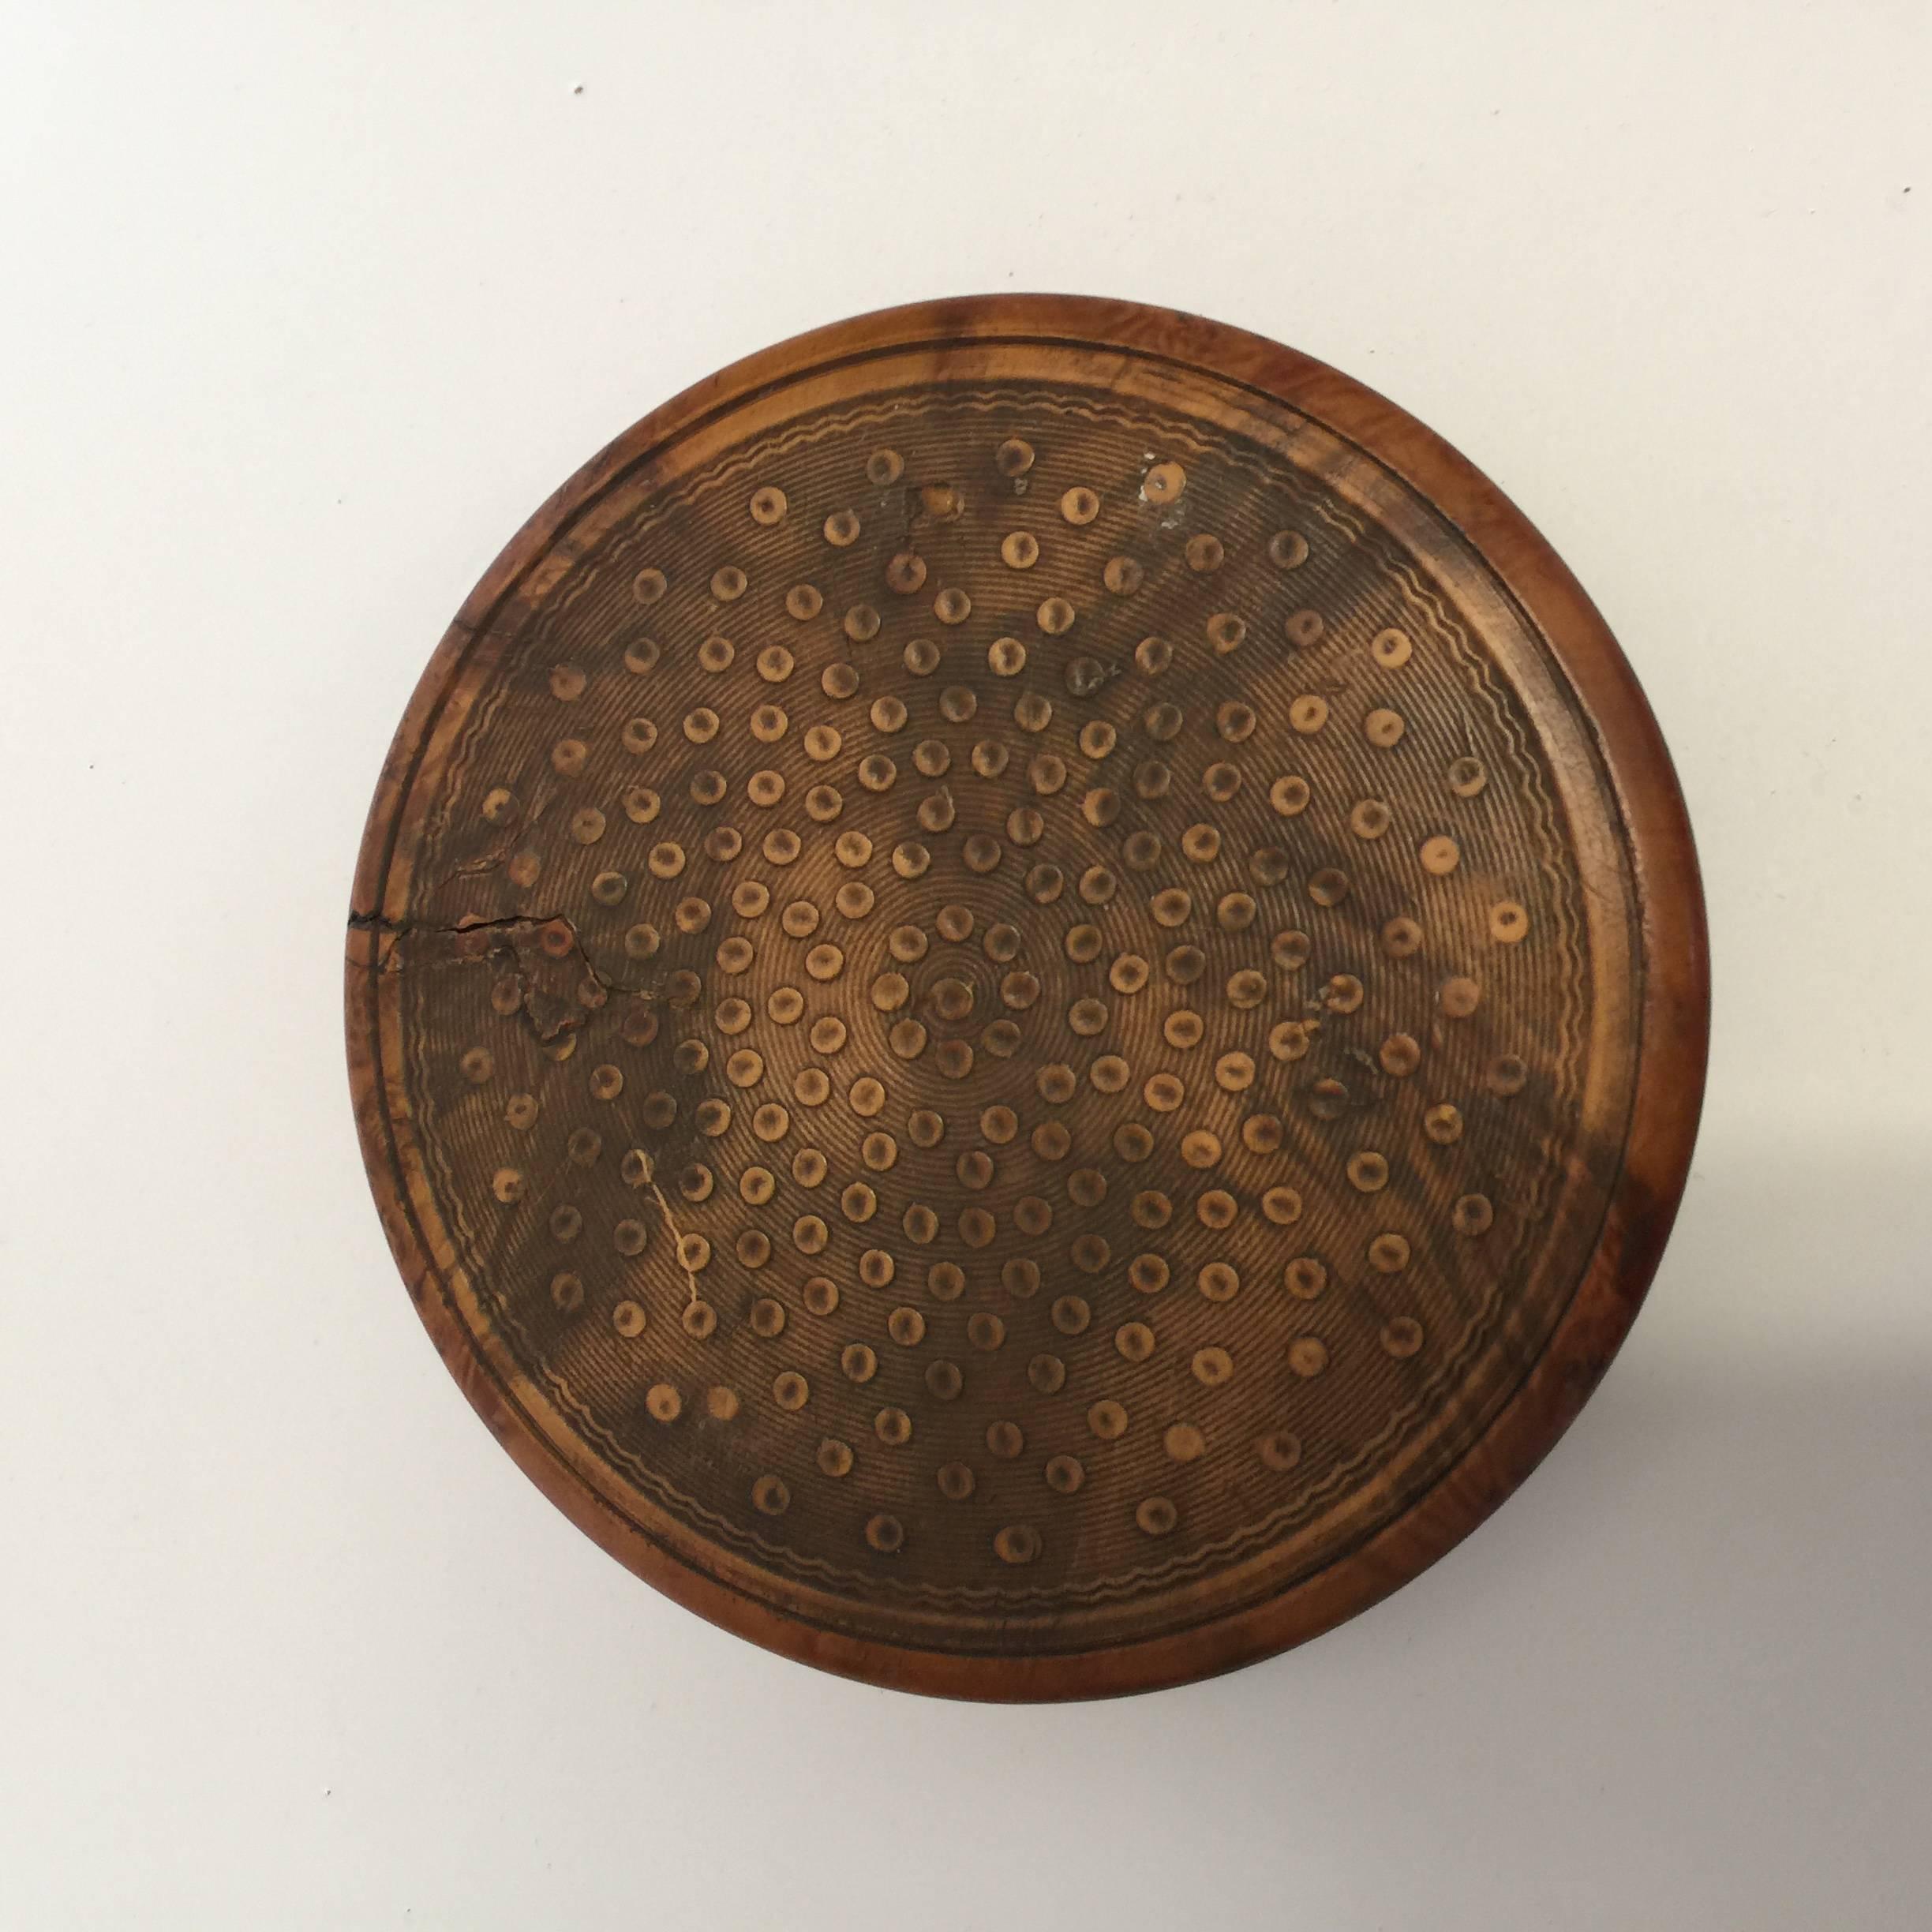 Empire Pressed Wood Snuff Box of Napoleon in His Last Moments, Early 19th Century